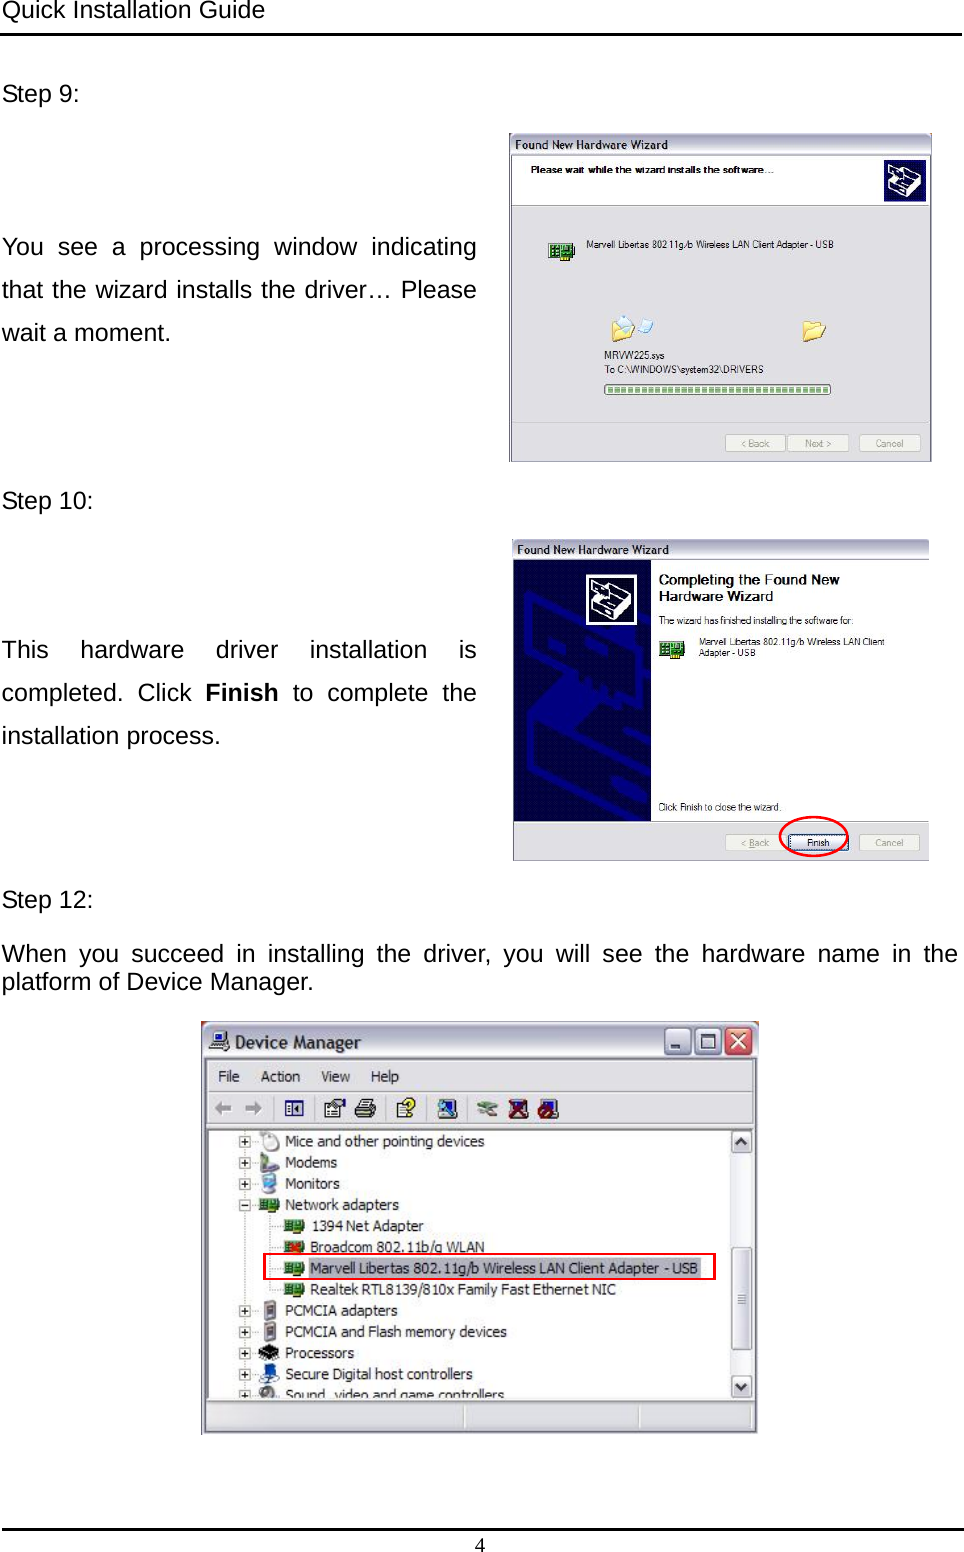 Quick Installation Guide   Step 9:   You see a processing window indicating that the wizard installs the driver… Please wait a moment.  Step 10:   This hardware driver installation is completed. Click Finish to complete the installation process.  Step 12:   When you succeed in installing the driver, you will see the hardware name in the platform of Device Manager.   4 